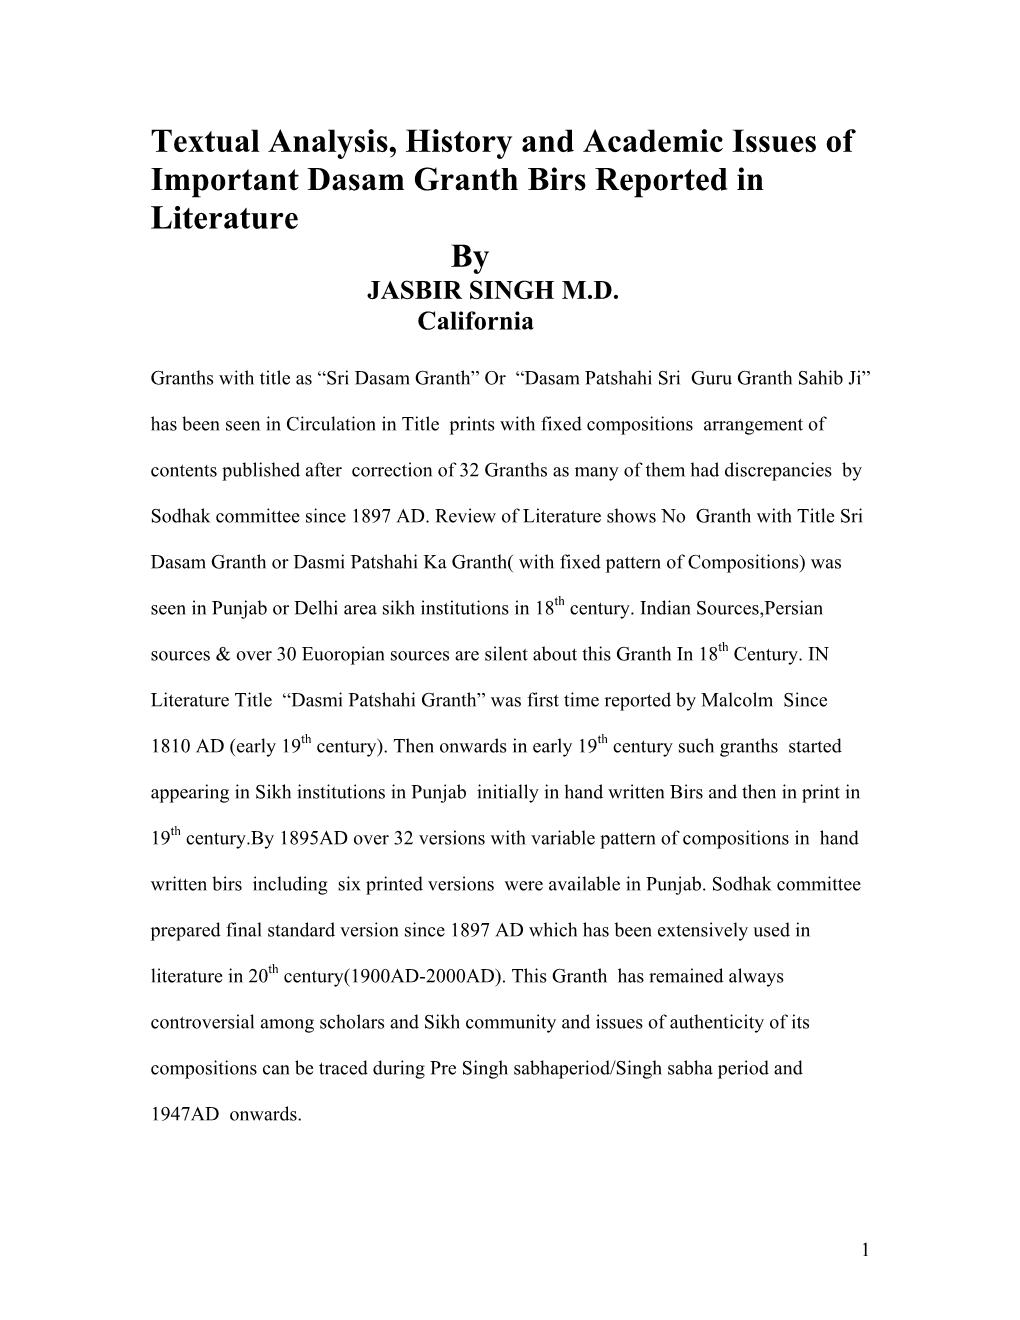 Textual Analysis, History and Academic Issues of Important Dasam Granth Birs Reported in Literature by JASBIR SINGH M.D